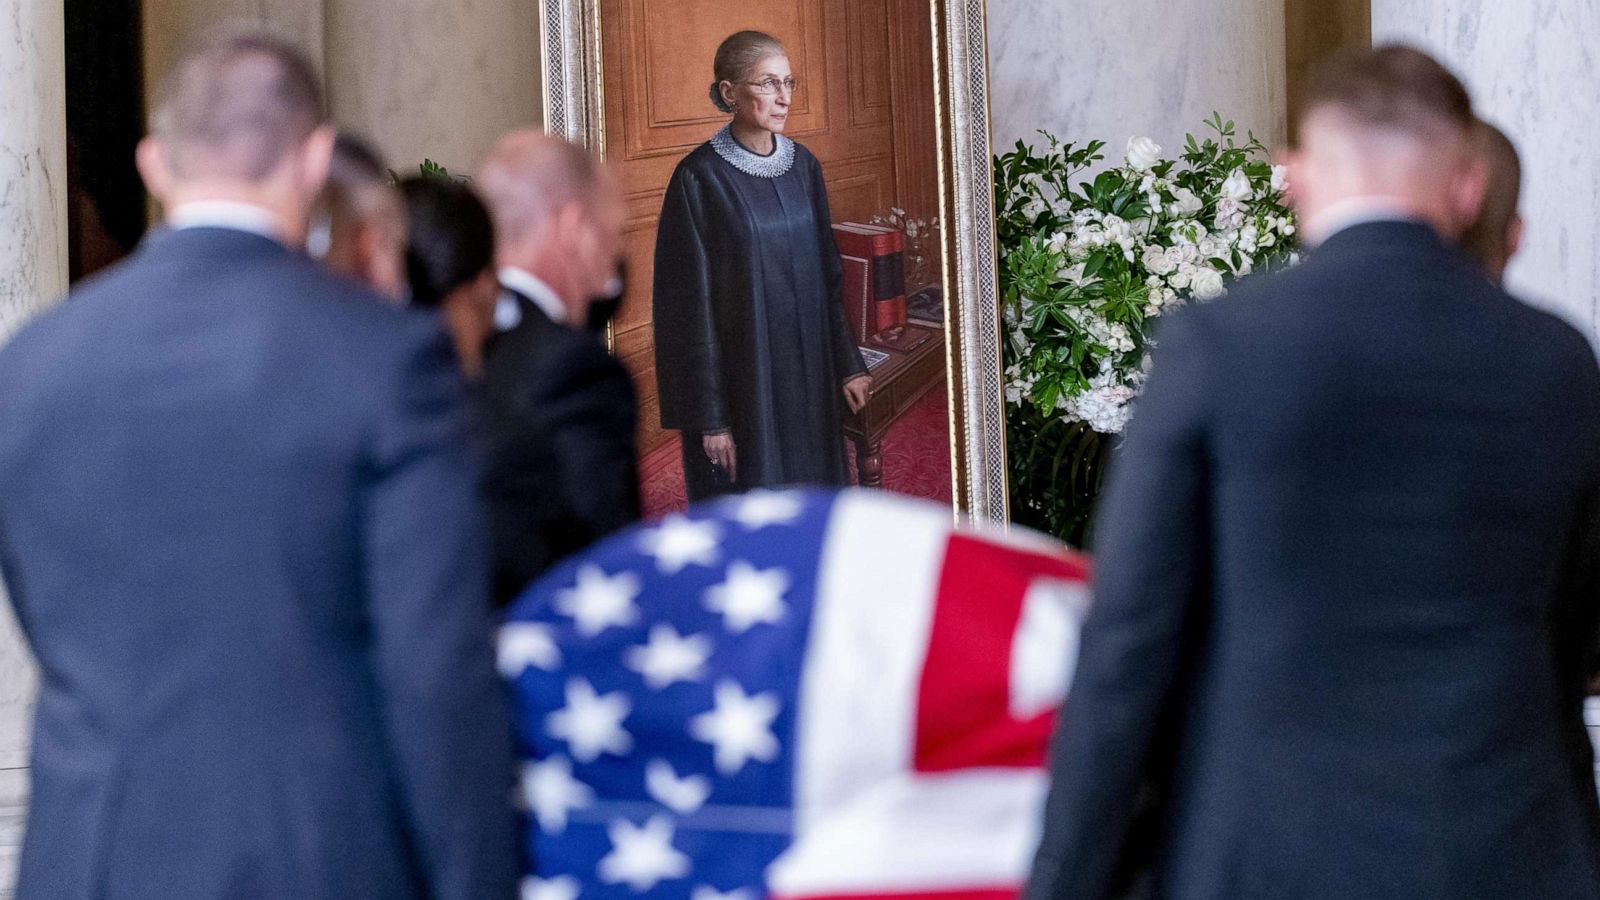 live-updates-justice-ruth-bader-ginsburg-to-lie-in-state-at-us-capitol